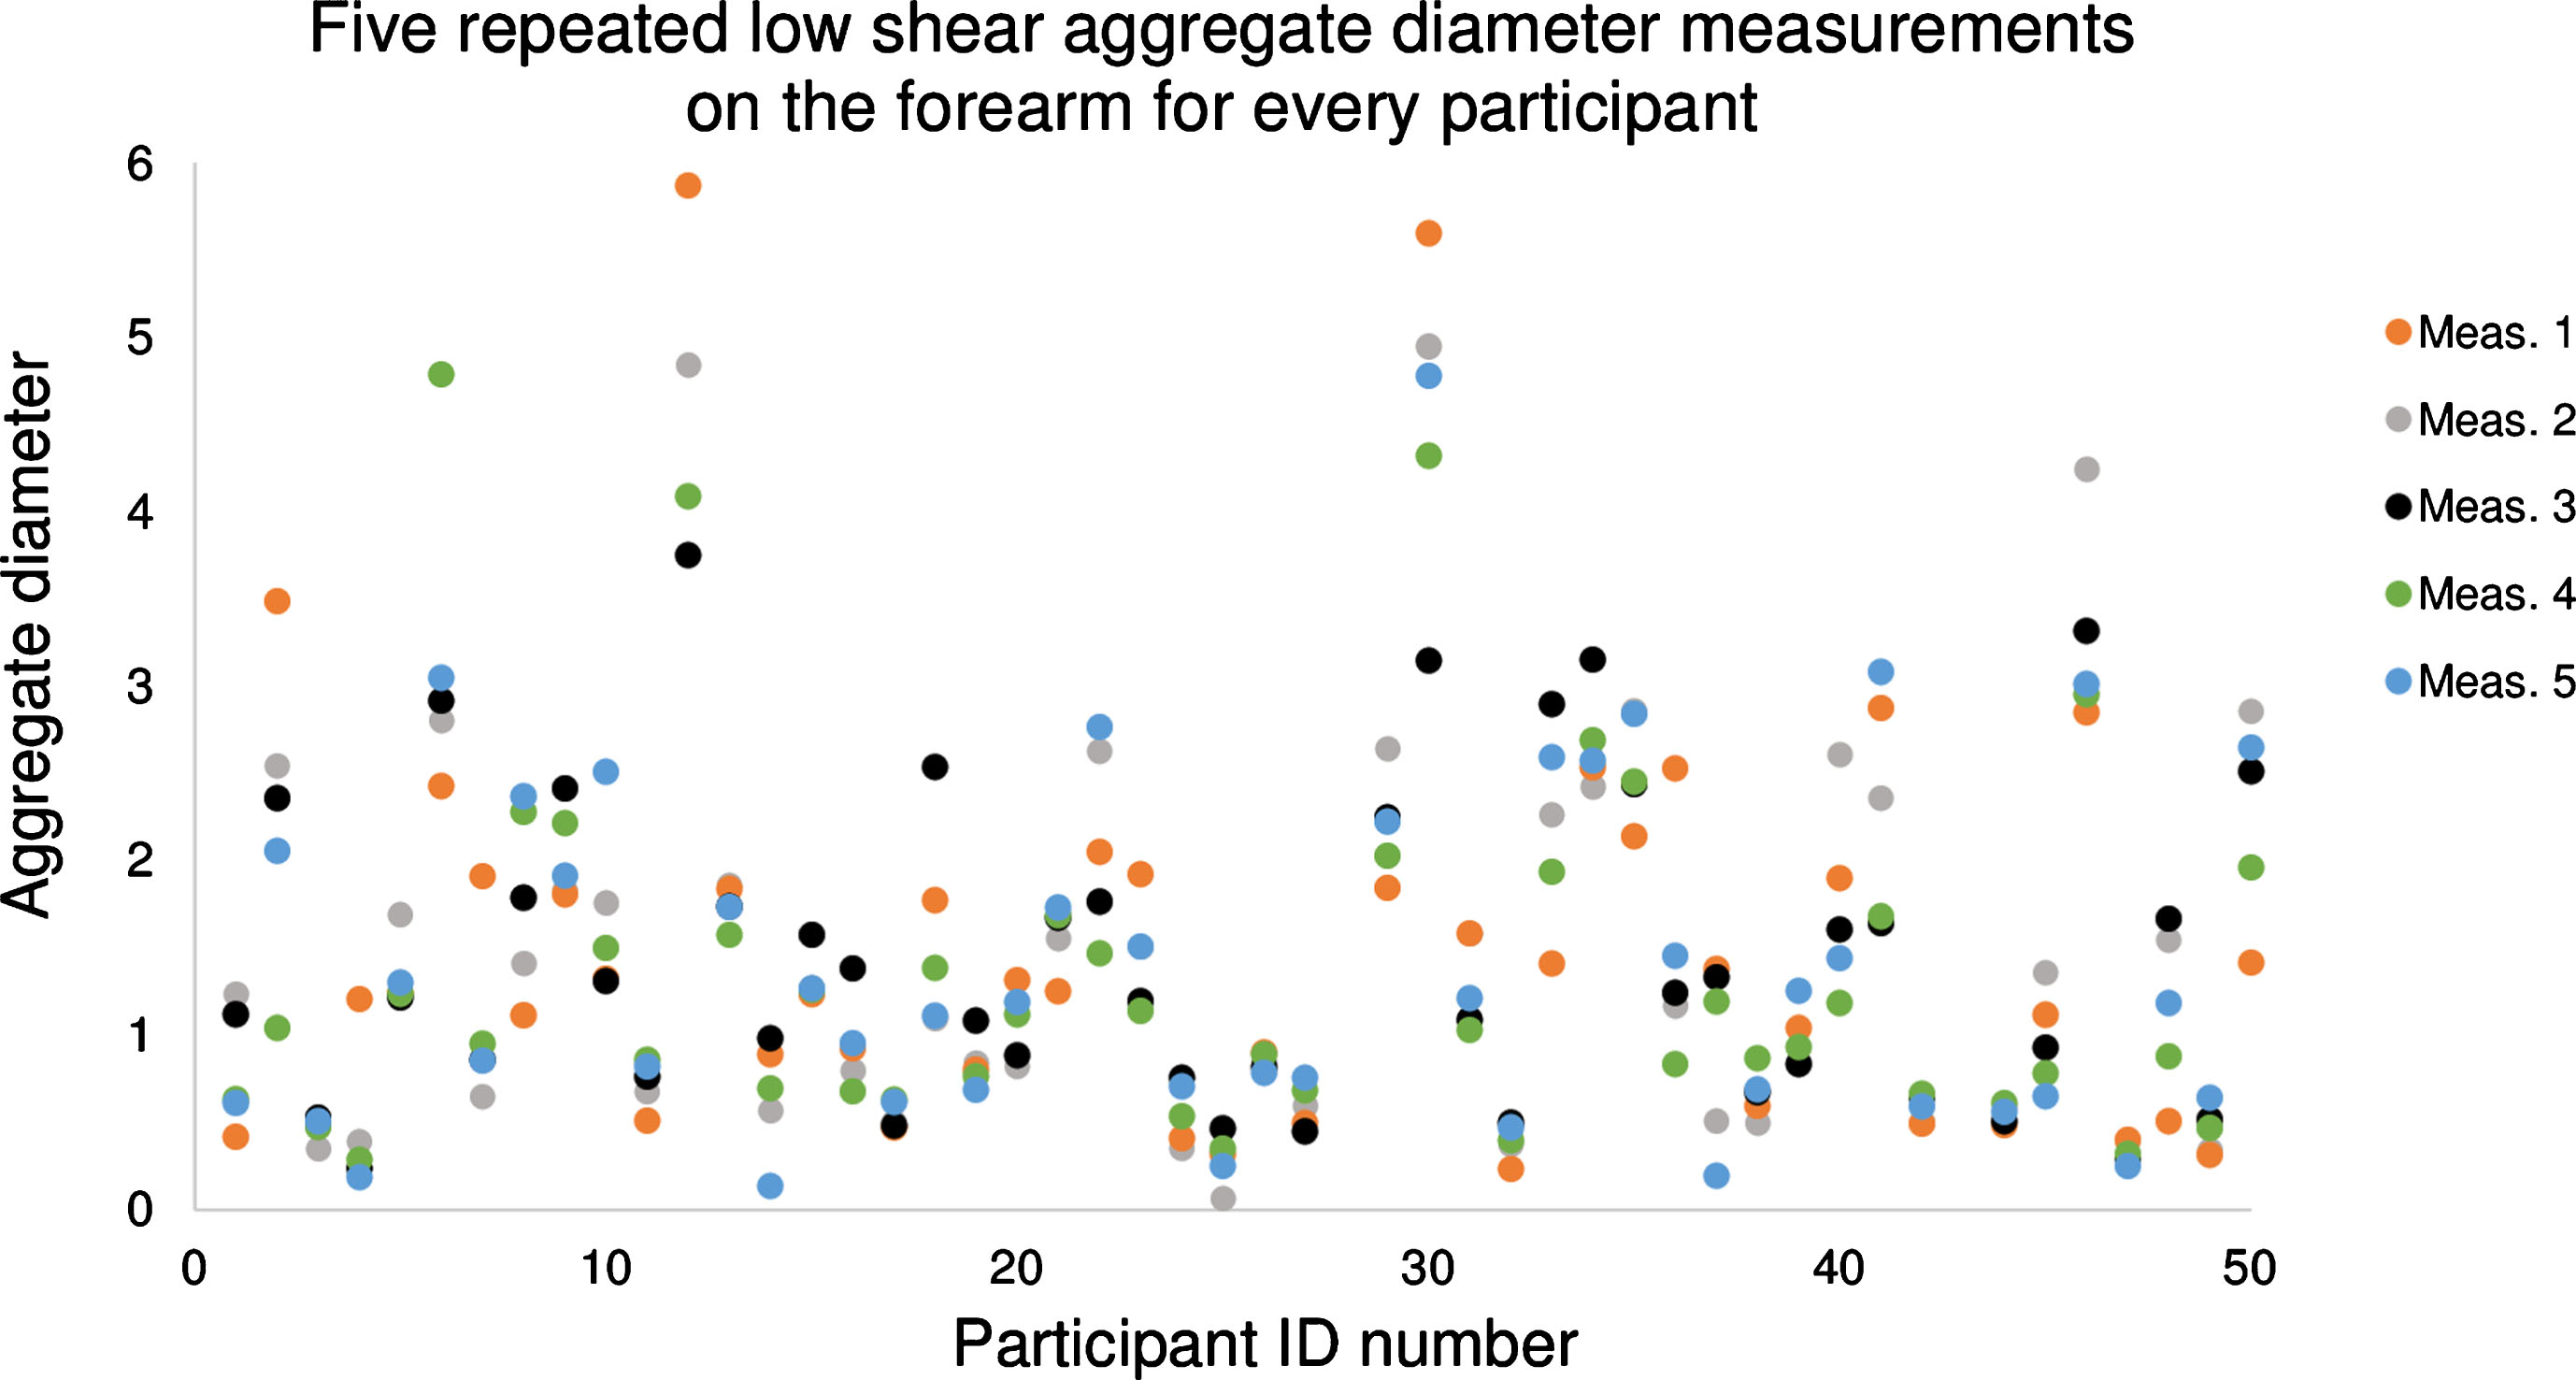 Plot of 5 measured values of the ultrasound aggregation diameter (parameter D) on the forearm at a low shear rate for every participant. Participants #28 and #43 had no data for this configuration. The color of data points corresponds to the order in which measurements were taken. There was no association between the aggregate diameter and the measurement order (p-value >0.05 among 5 measurements).